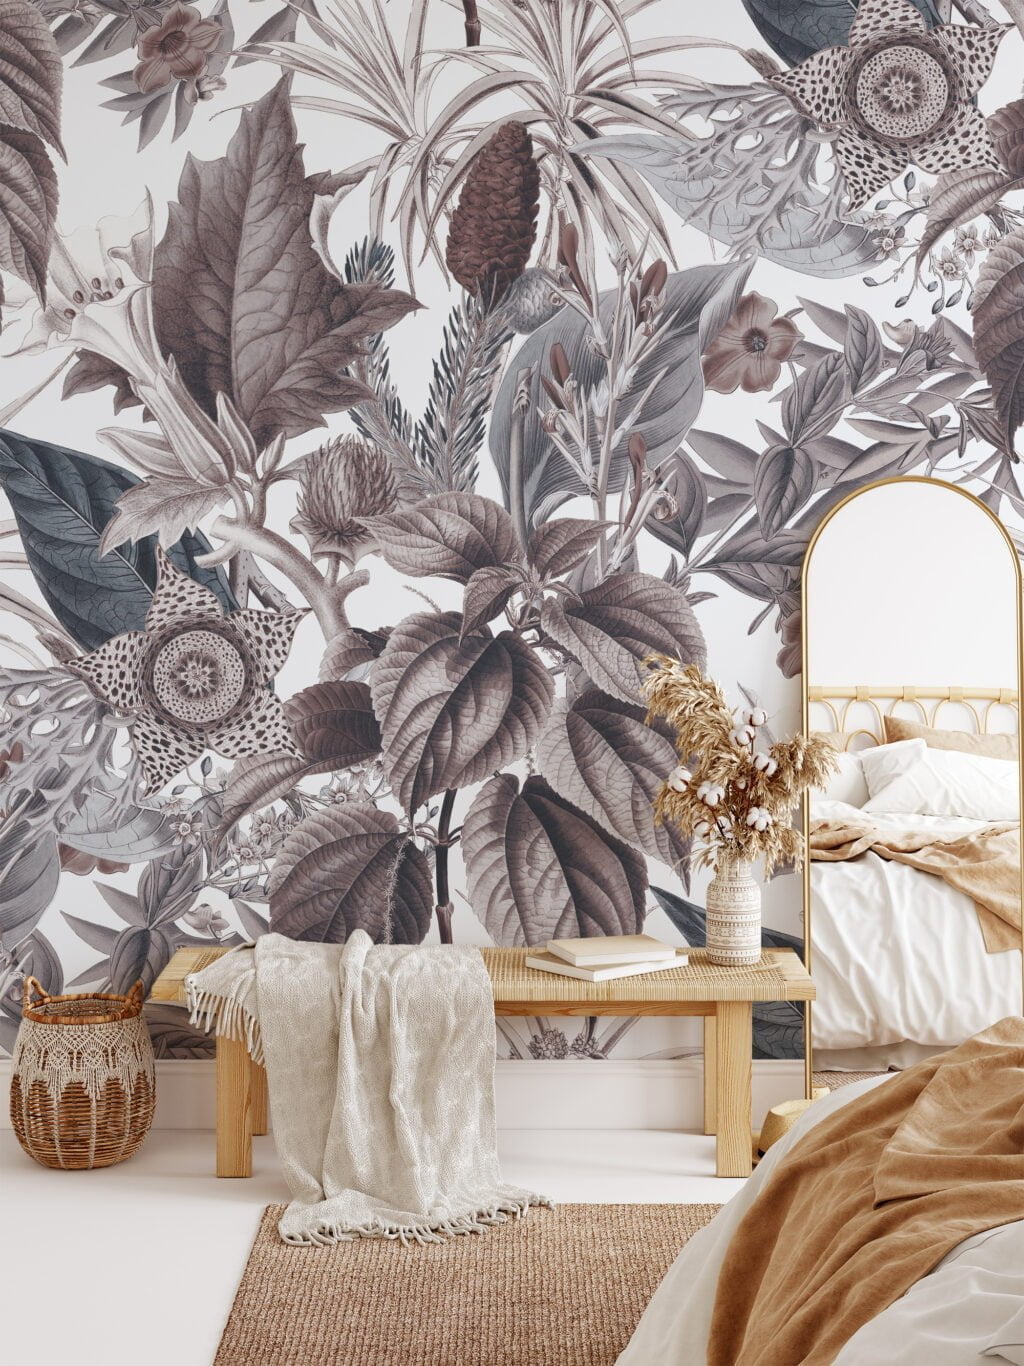 Traditional Plant Illustration Vintage Style Flowers and Leaves on White Background Wallpaper, Peel and Stick Self Adhesive Removable Wall Mural, Old-Fashioned Garden Imagery